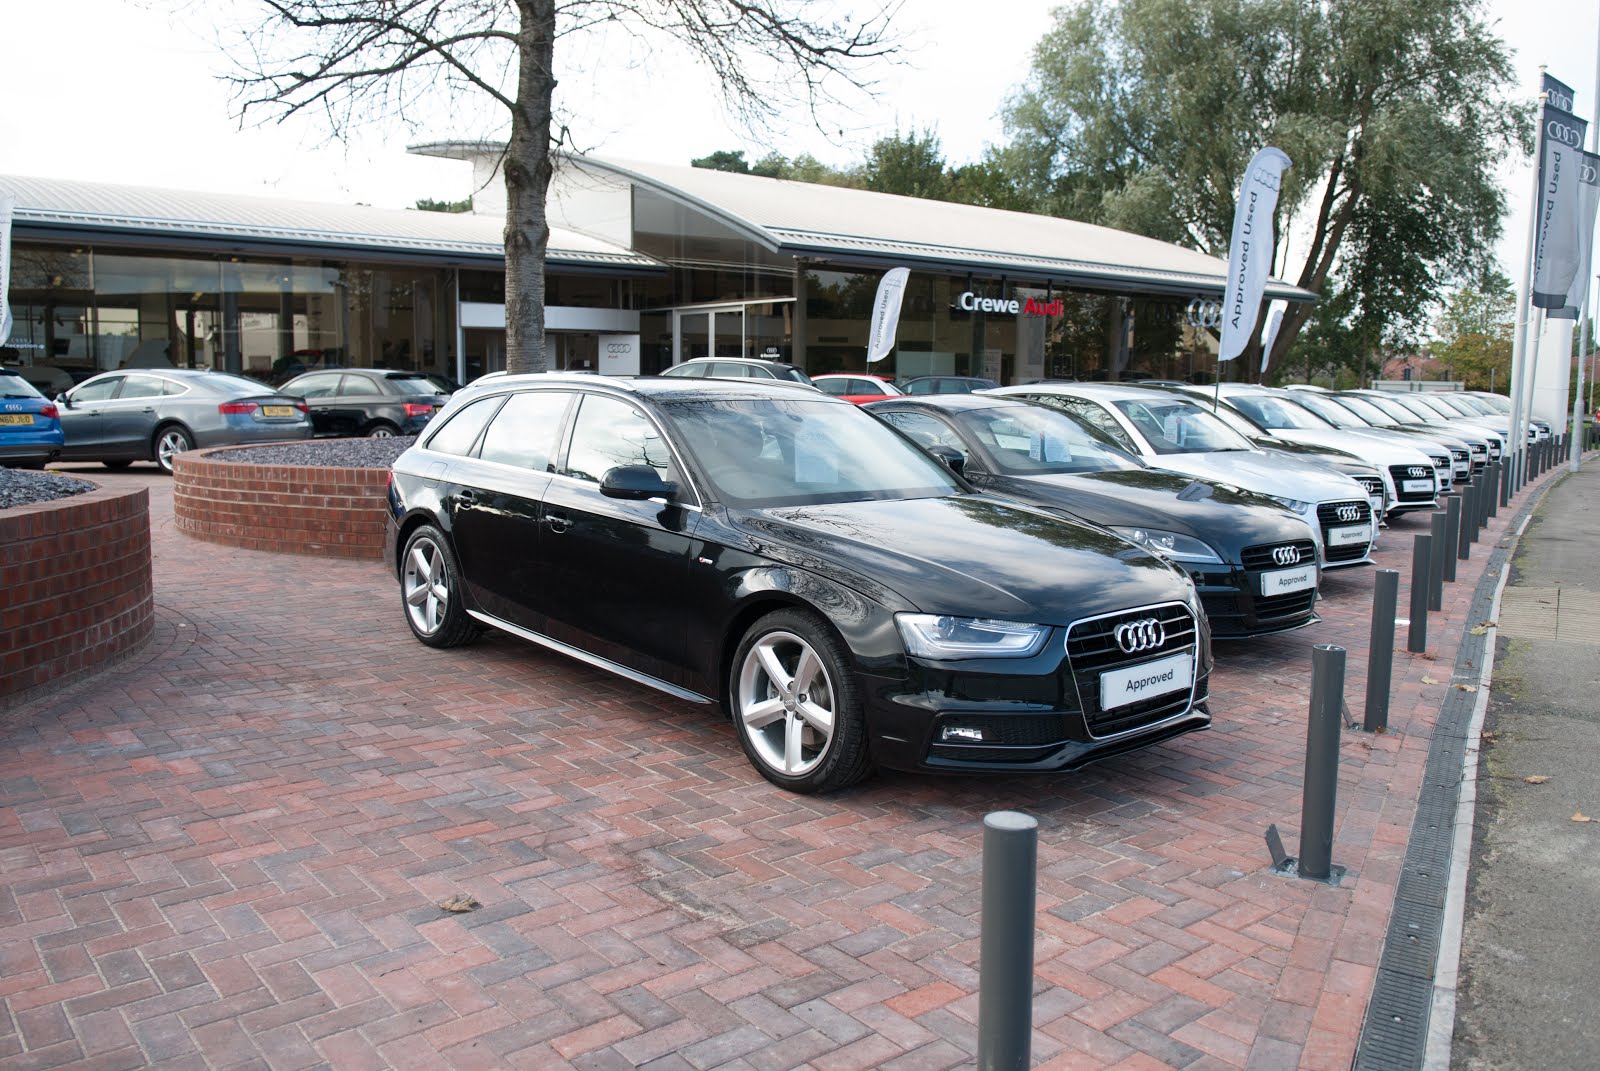 Used cars for sale on Crewe Audi forecourt